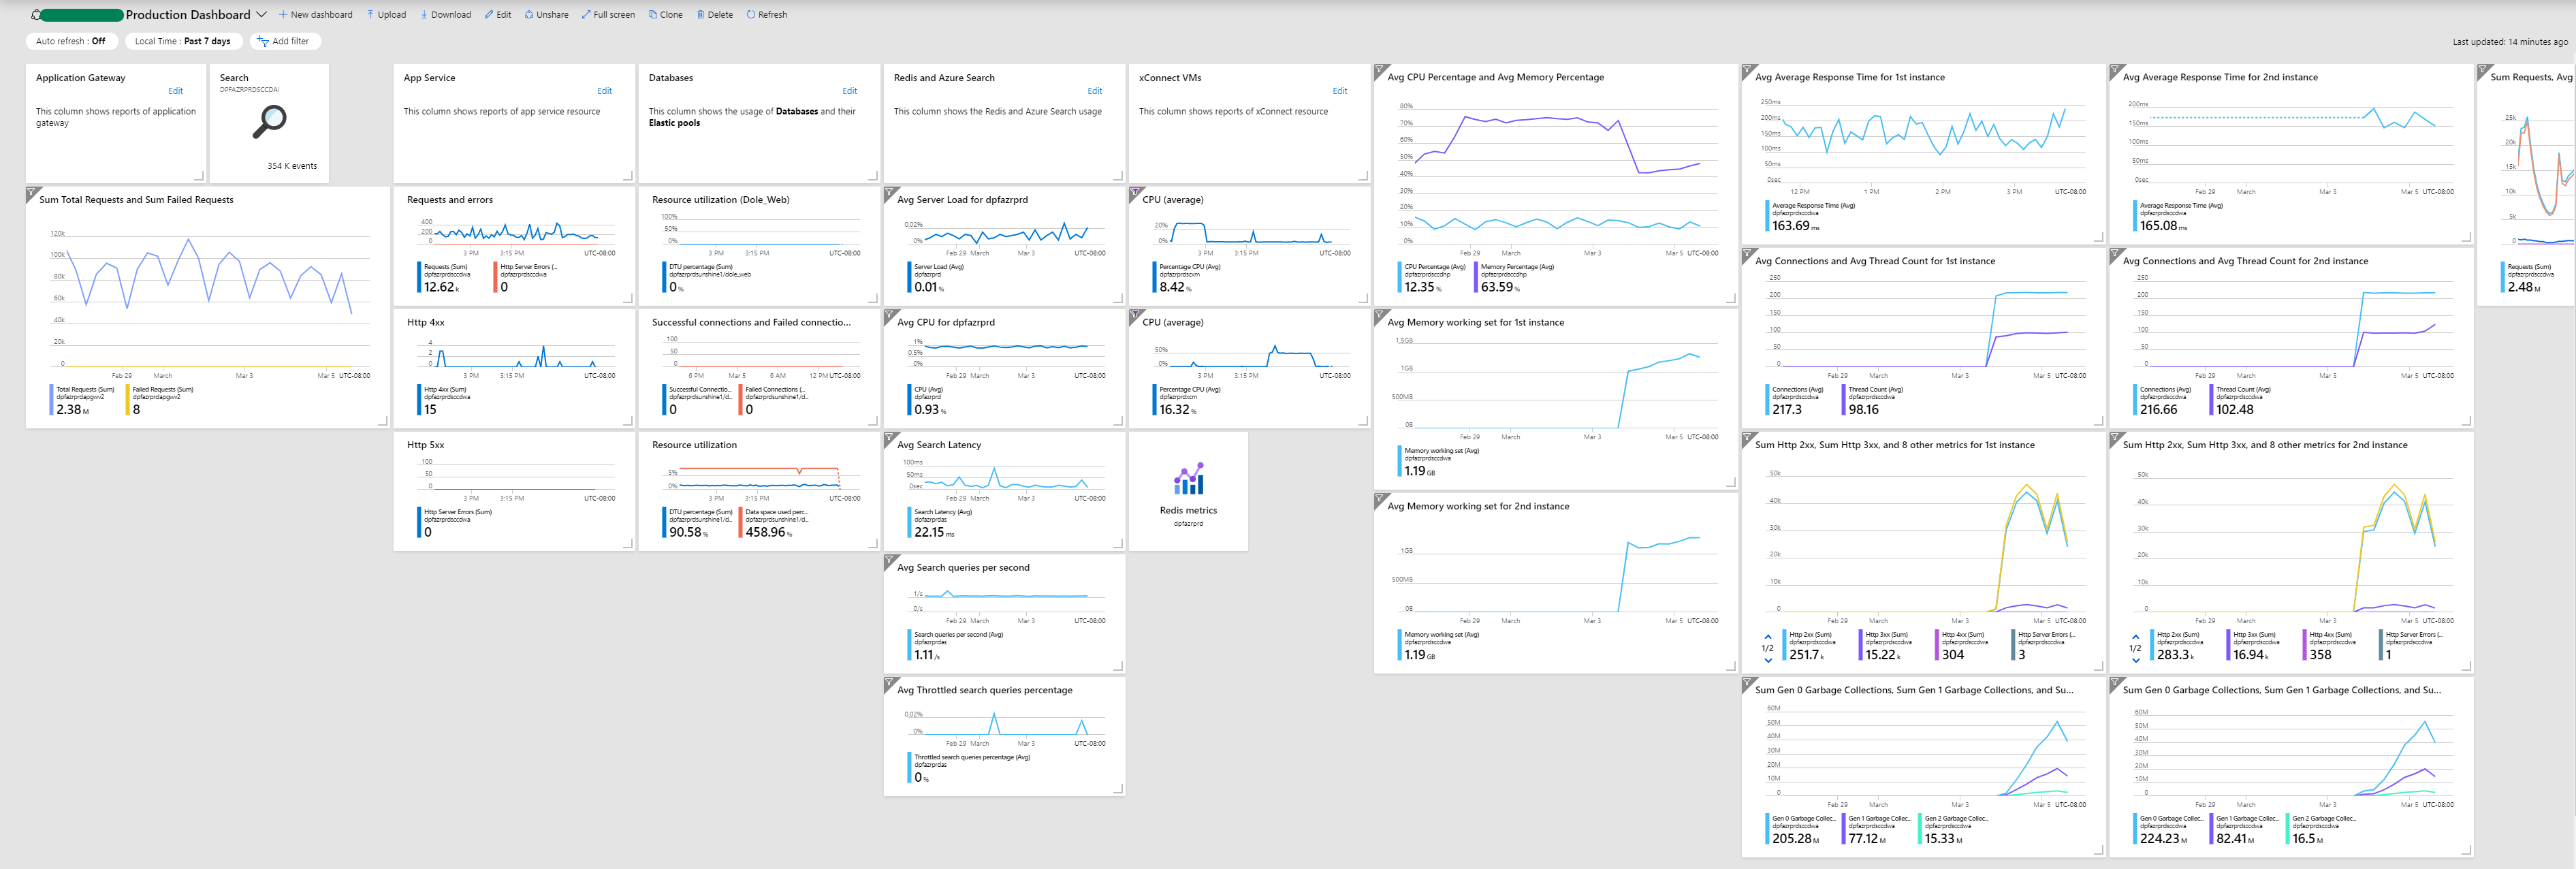 Production Dashboard for Sitecore in AWS screenshot